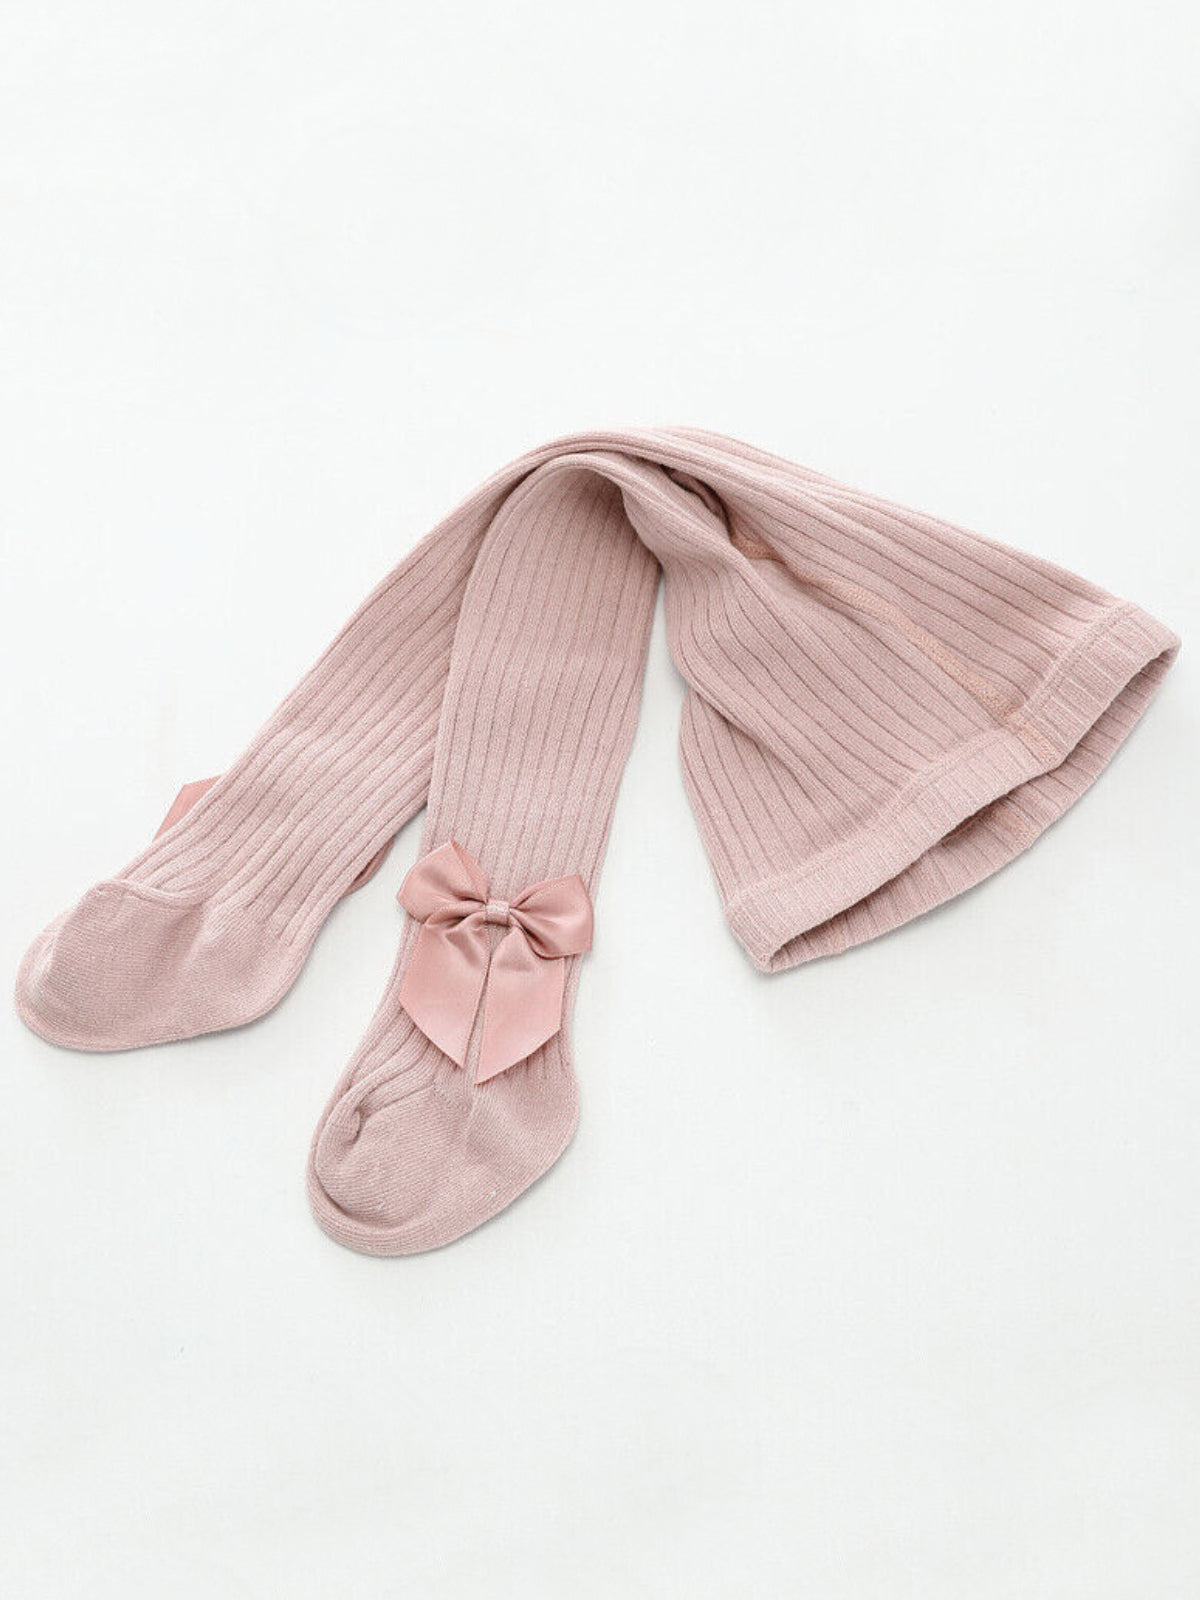 Mia Belle Girls Bowknot Cotton Tights | Girls Accessories